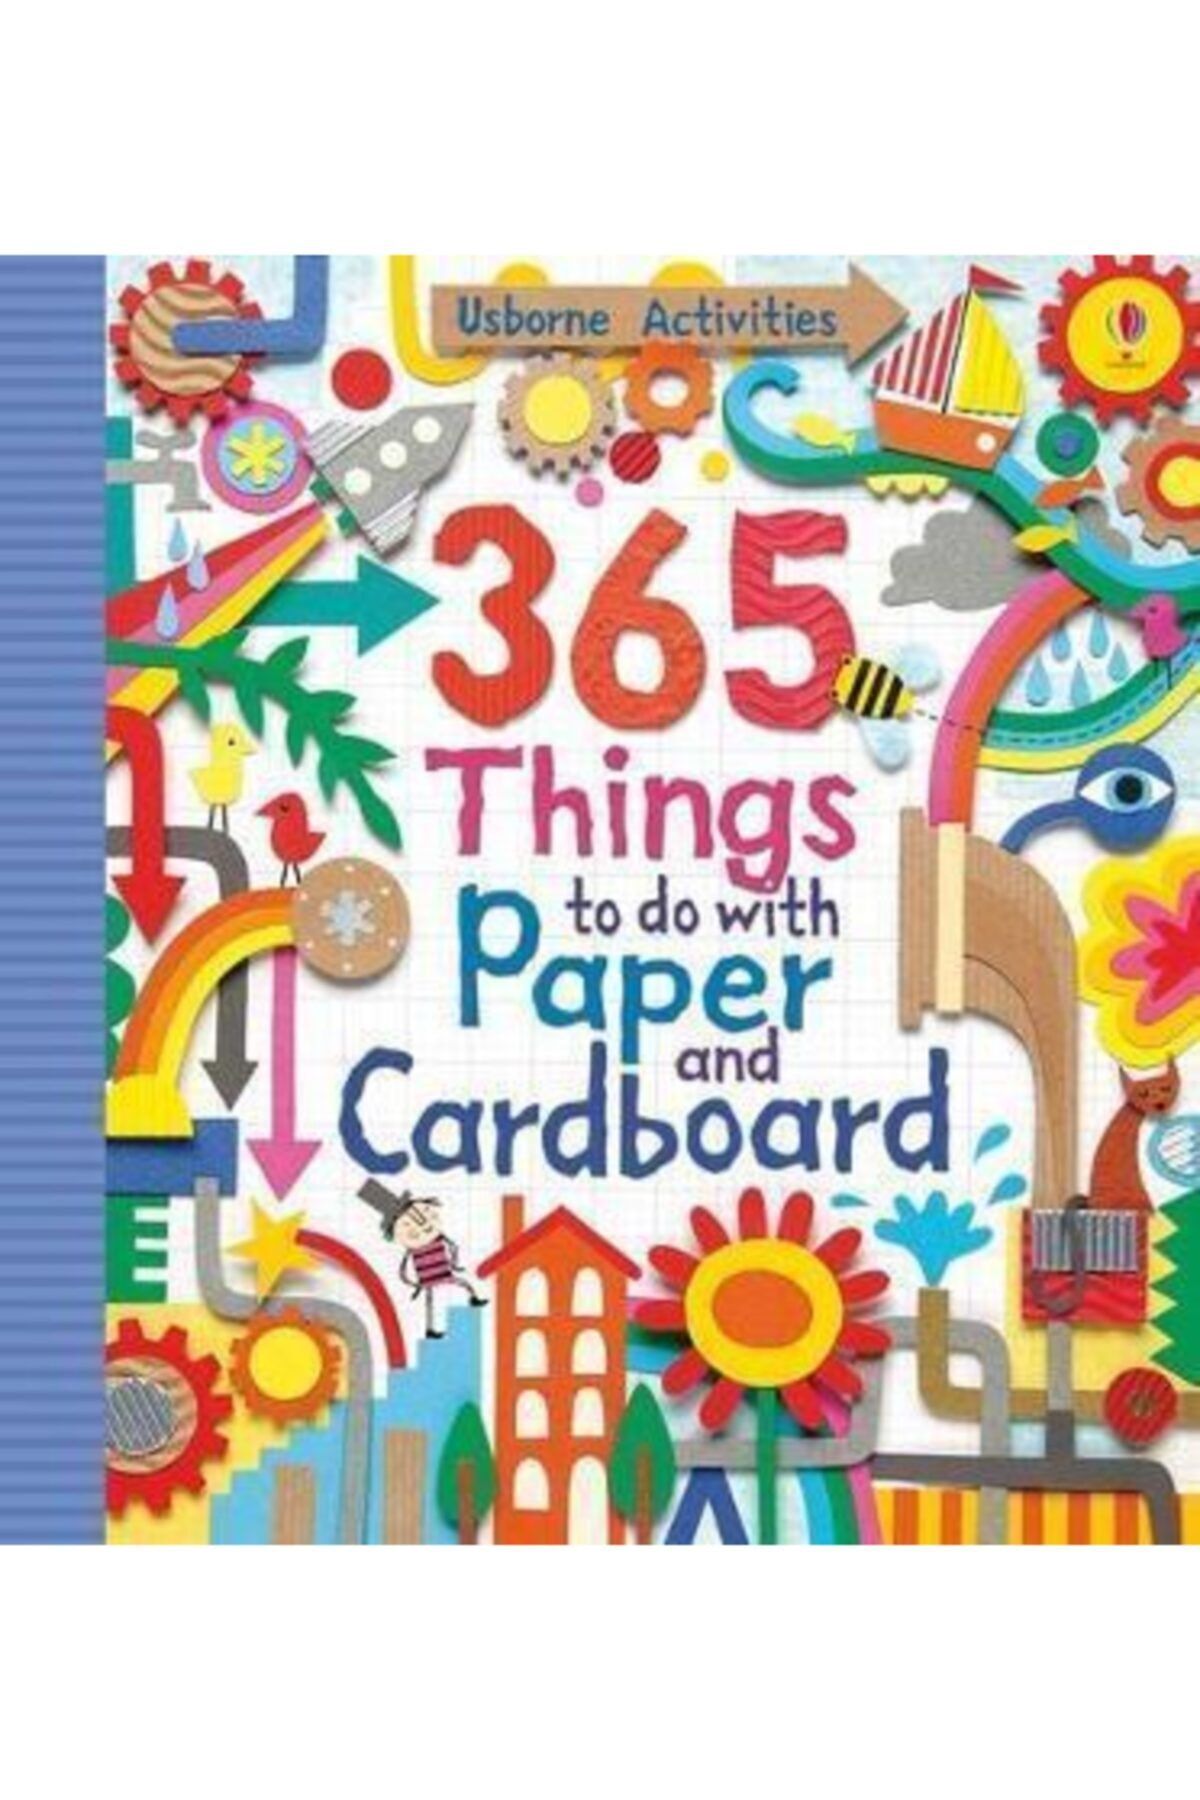 Usborne 365 Things To Do With Paper